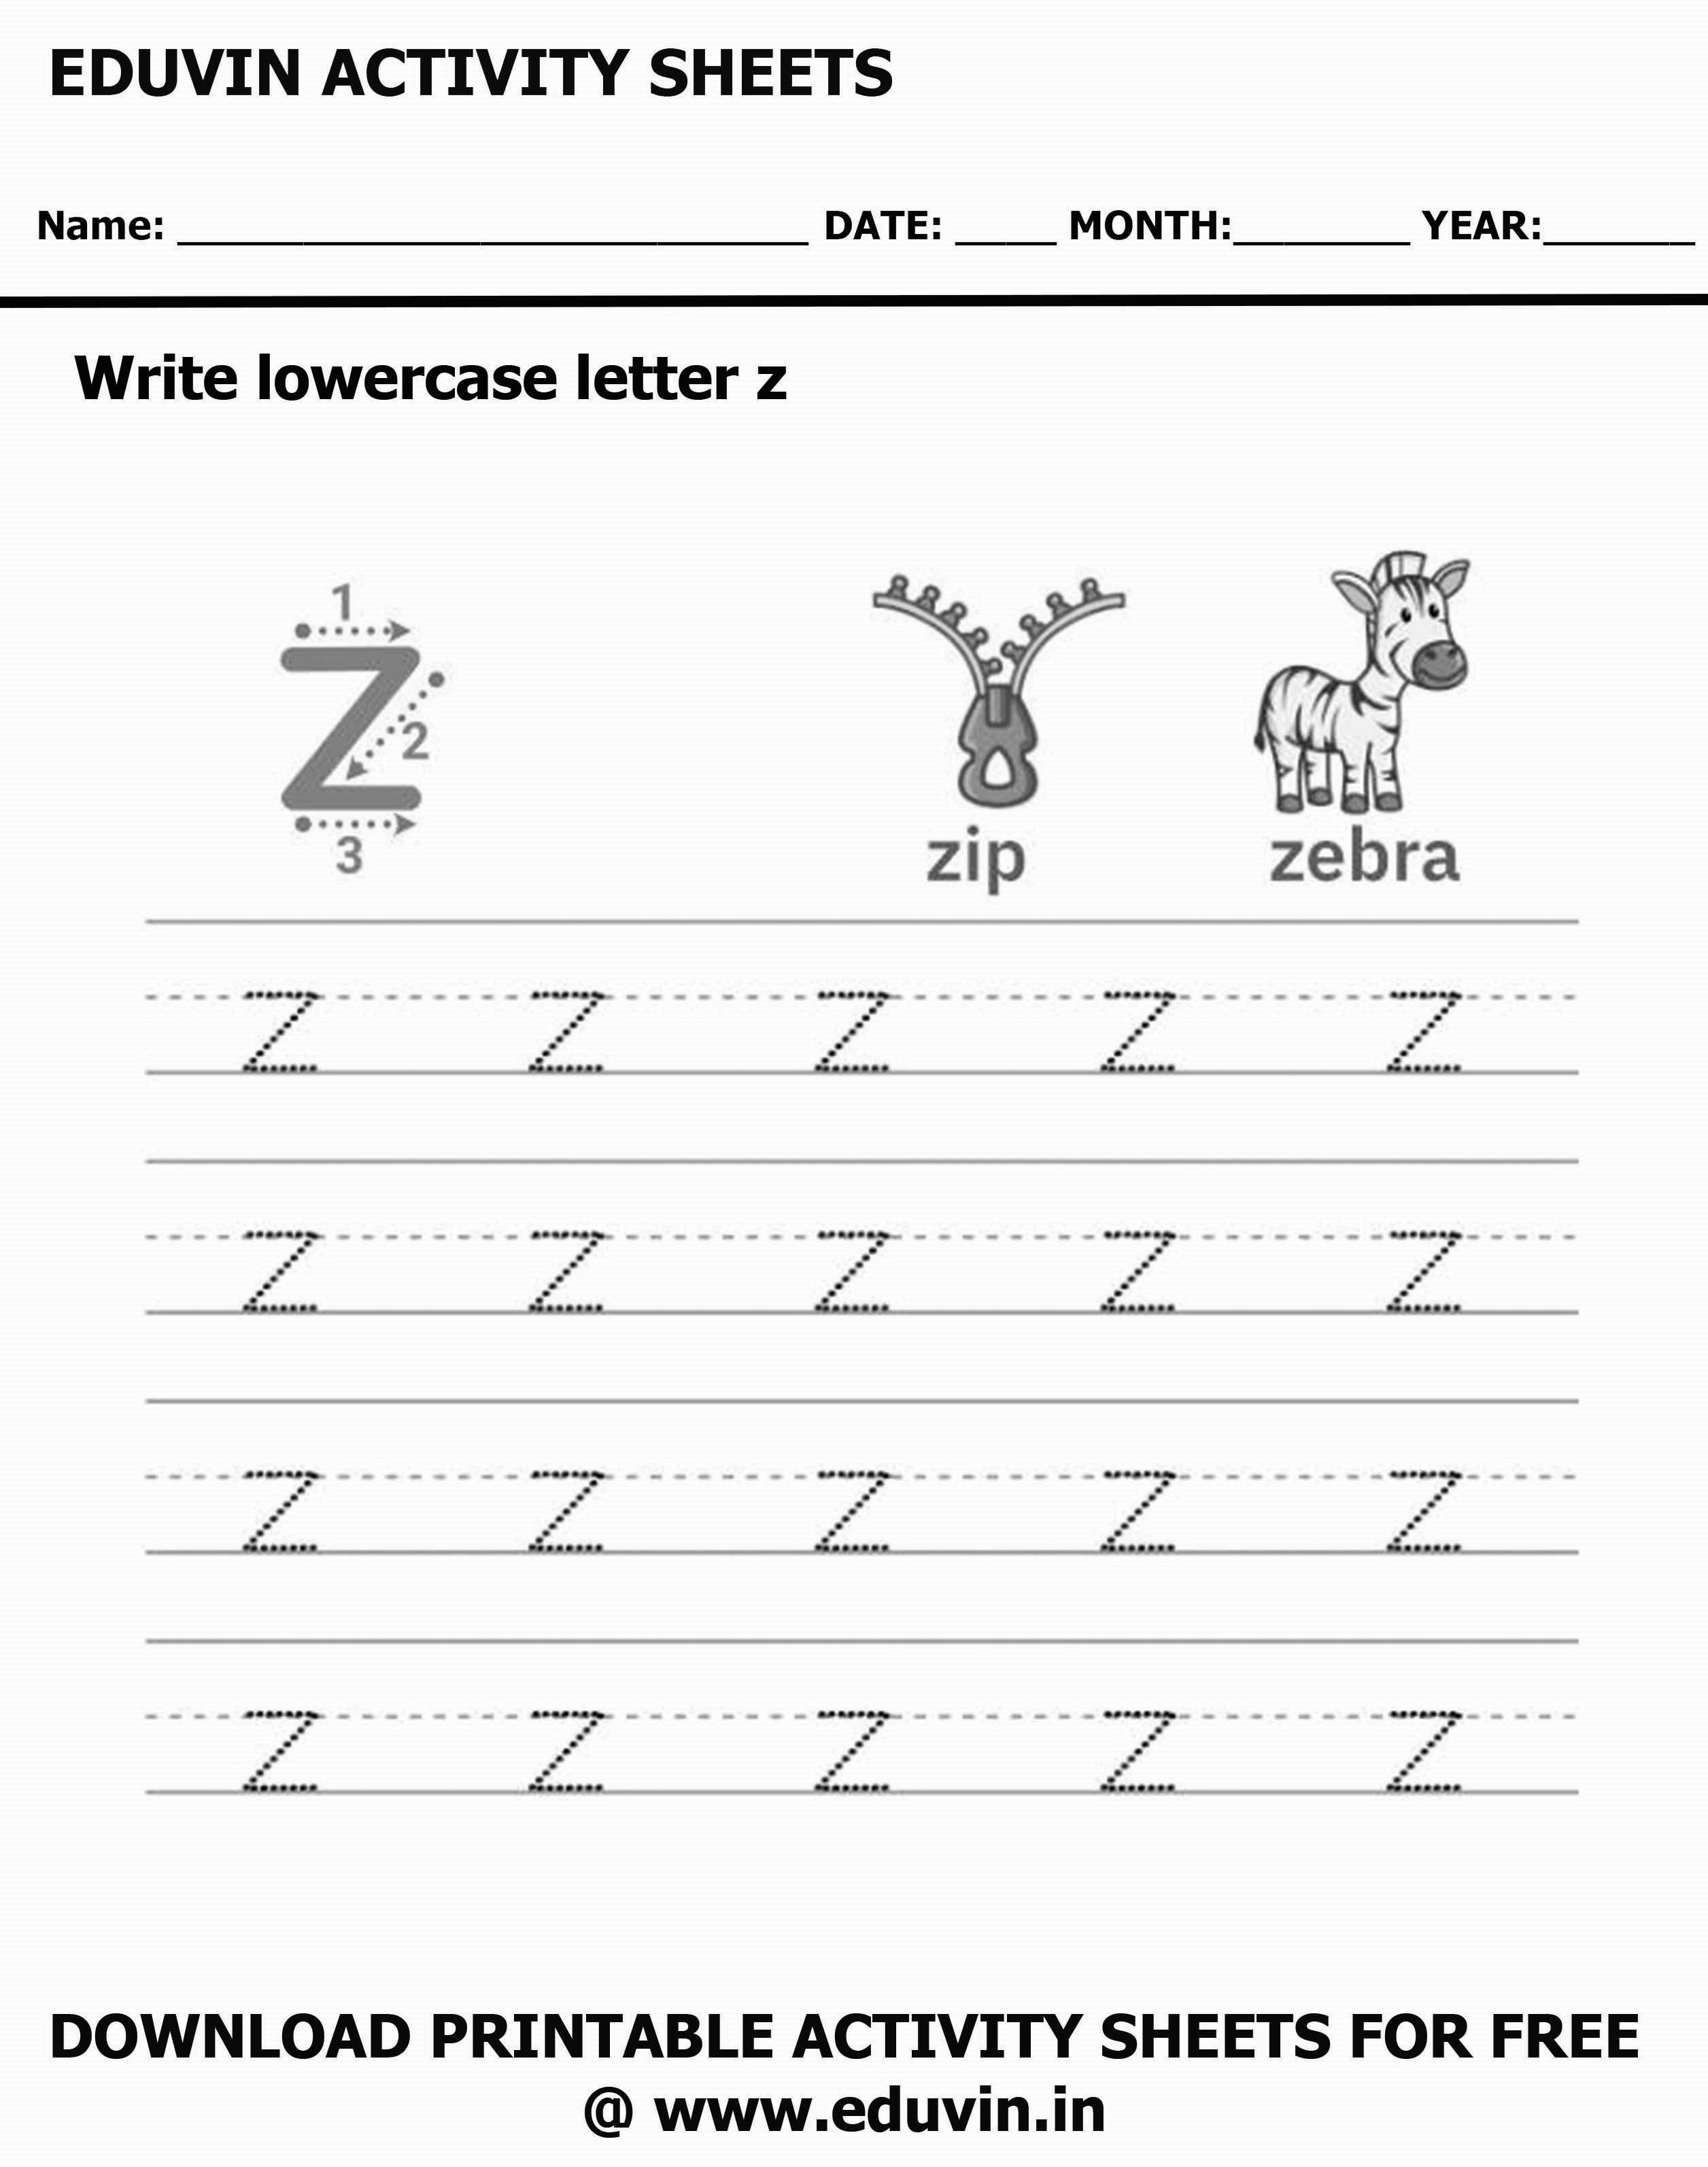 Lowercase Alphabet z Worksheets | Letter z Trace and Write Activity Sheet For Tracing and Letter Writing For Kids